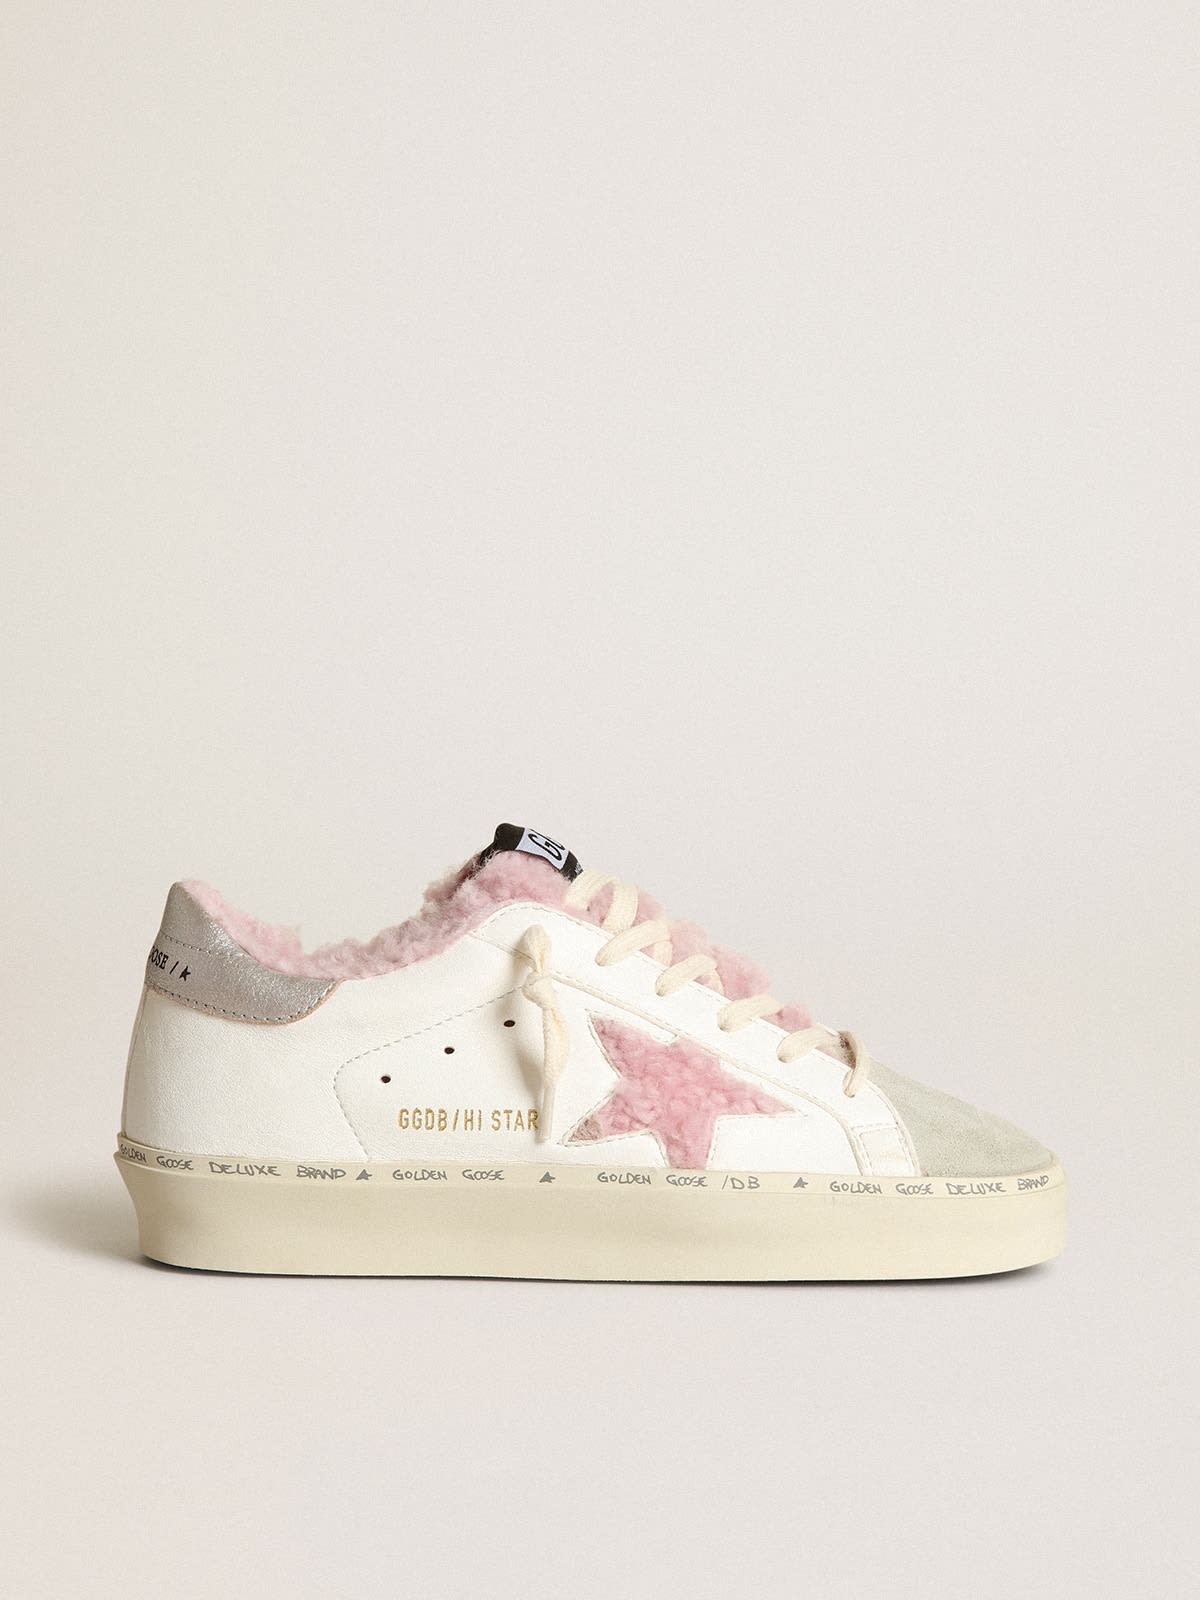 Hi Star in white nappa with pink shearling star and lining - 1